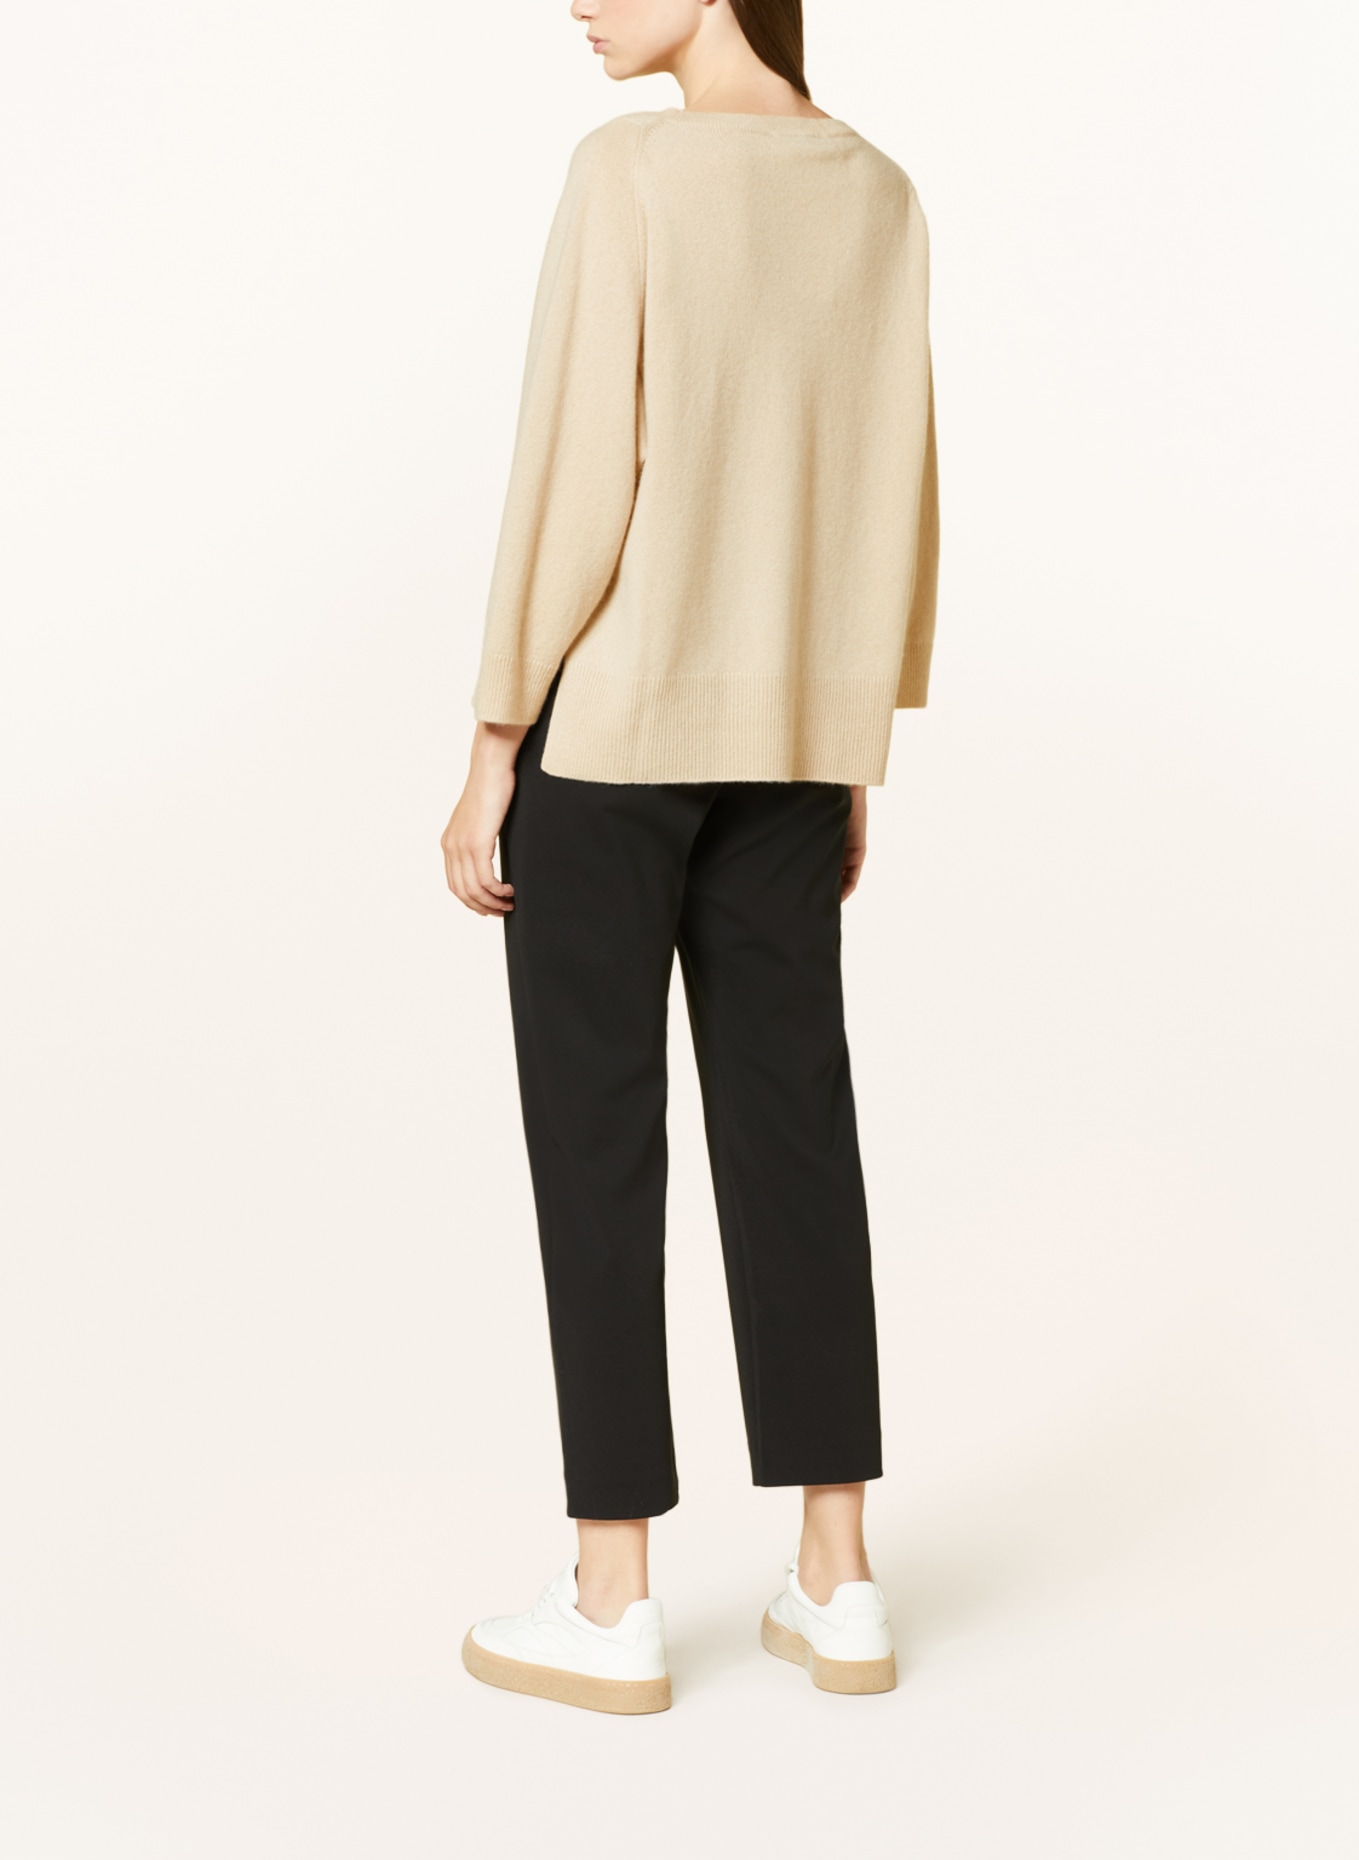 WEEKEND MaxMara Cashmere sweater ALCE with 3/4 sleeves, Color: BEIGE (Image 3)